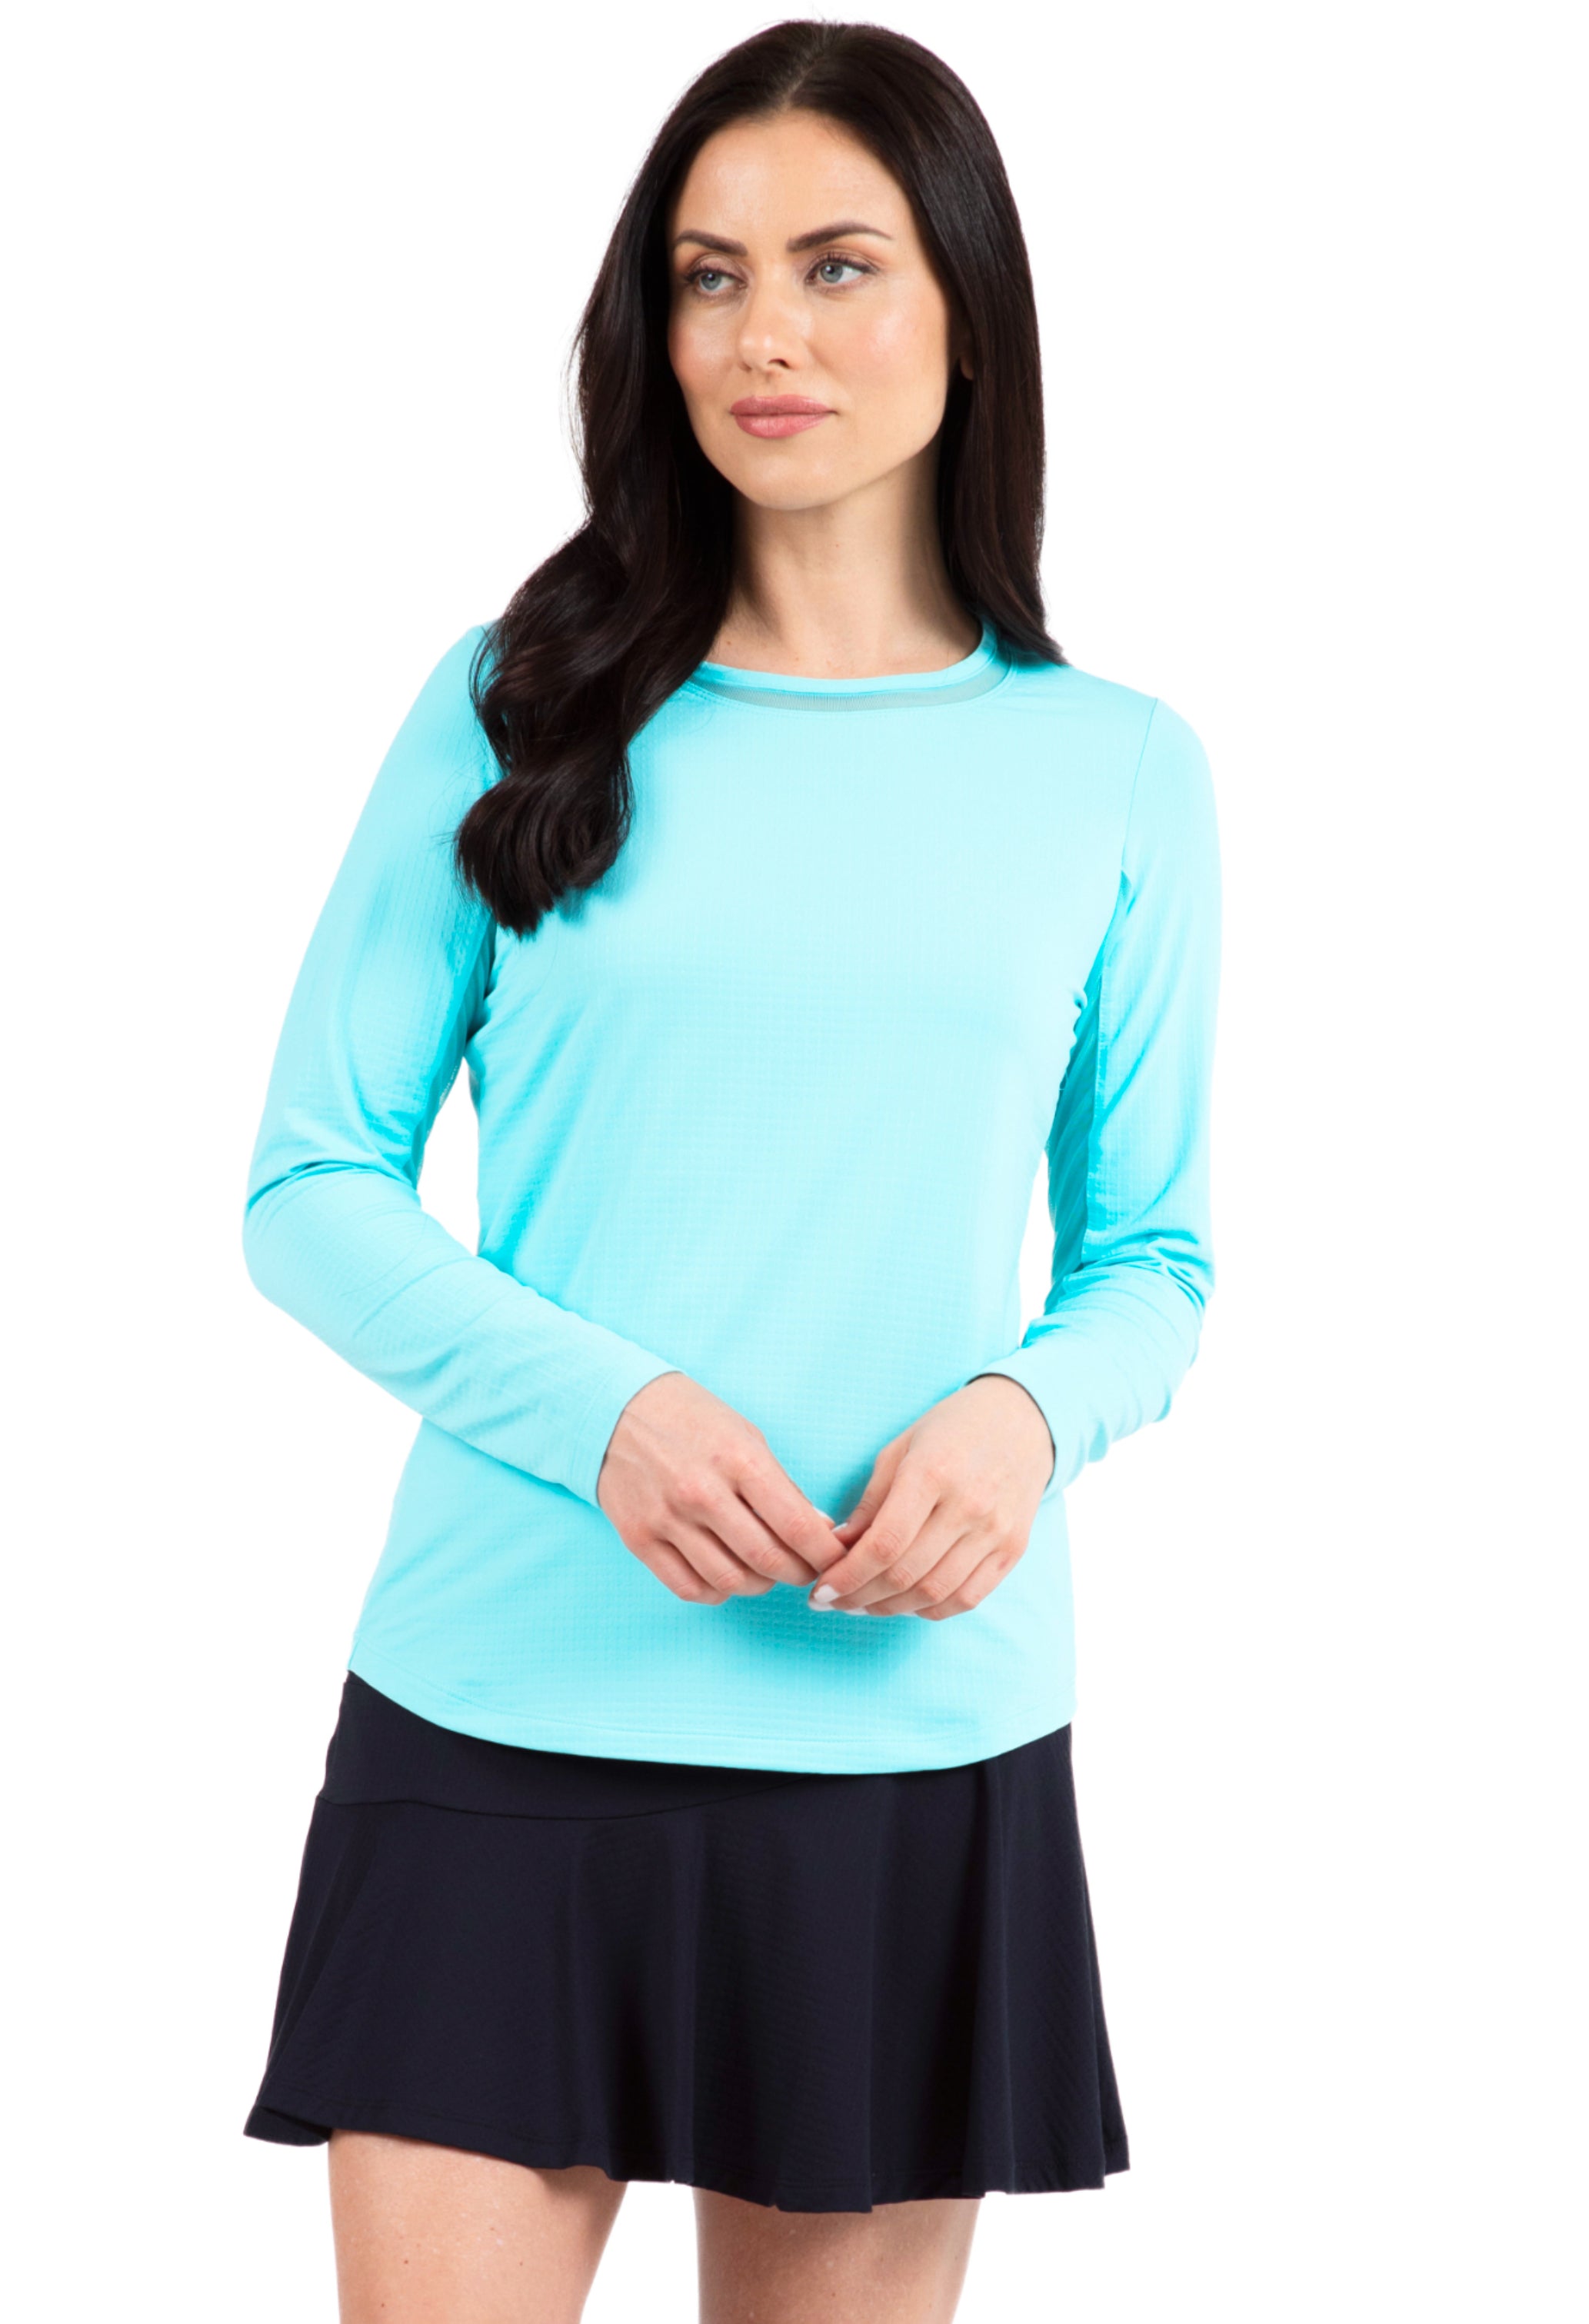 Long Sleeve Crew Neck with Mesh - 83000